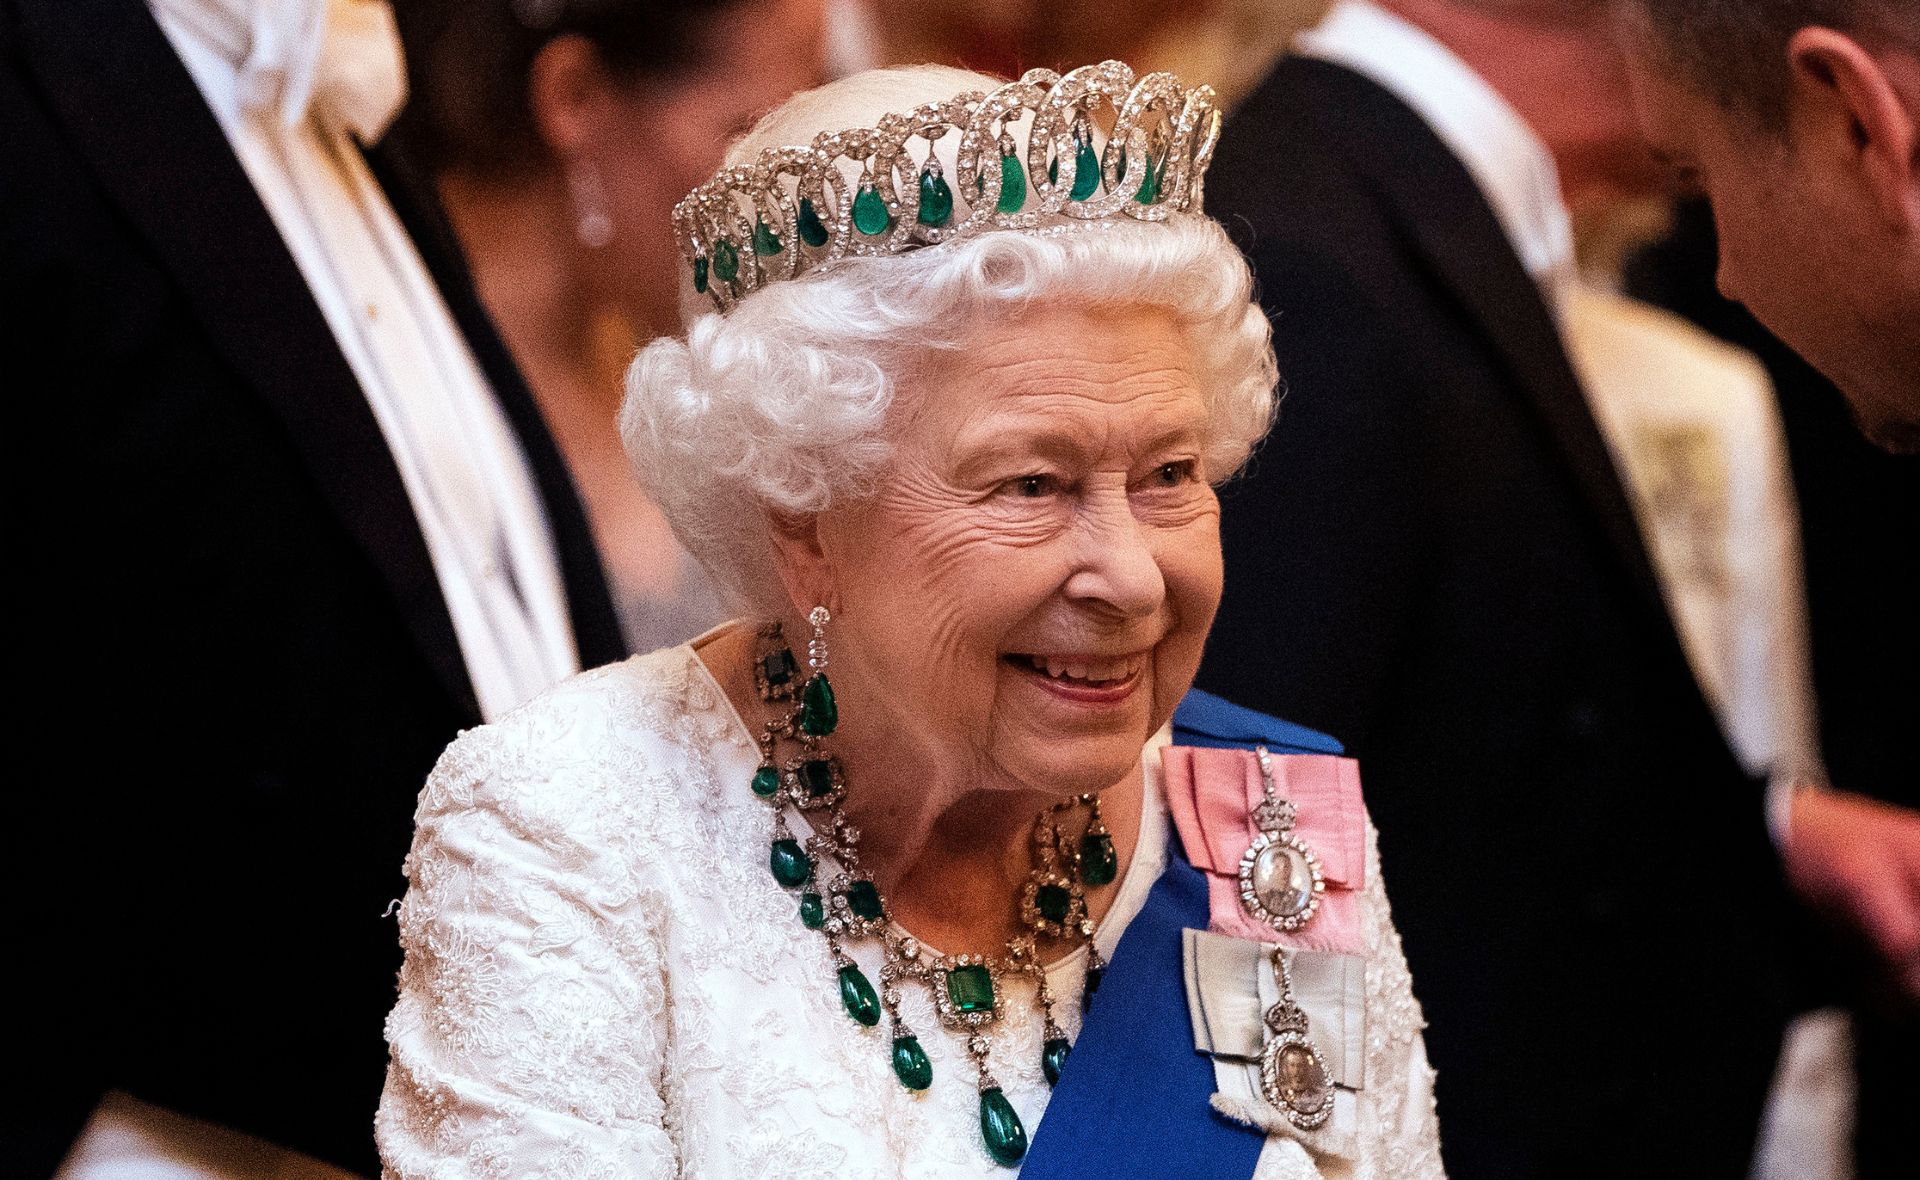 Who is attending Queen Elizabeth II’s funeral? Here are all the guests as they arrive!